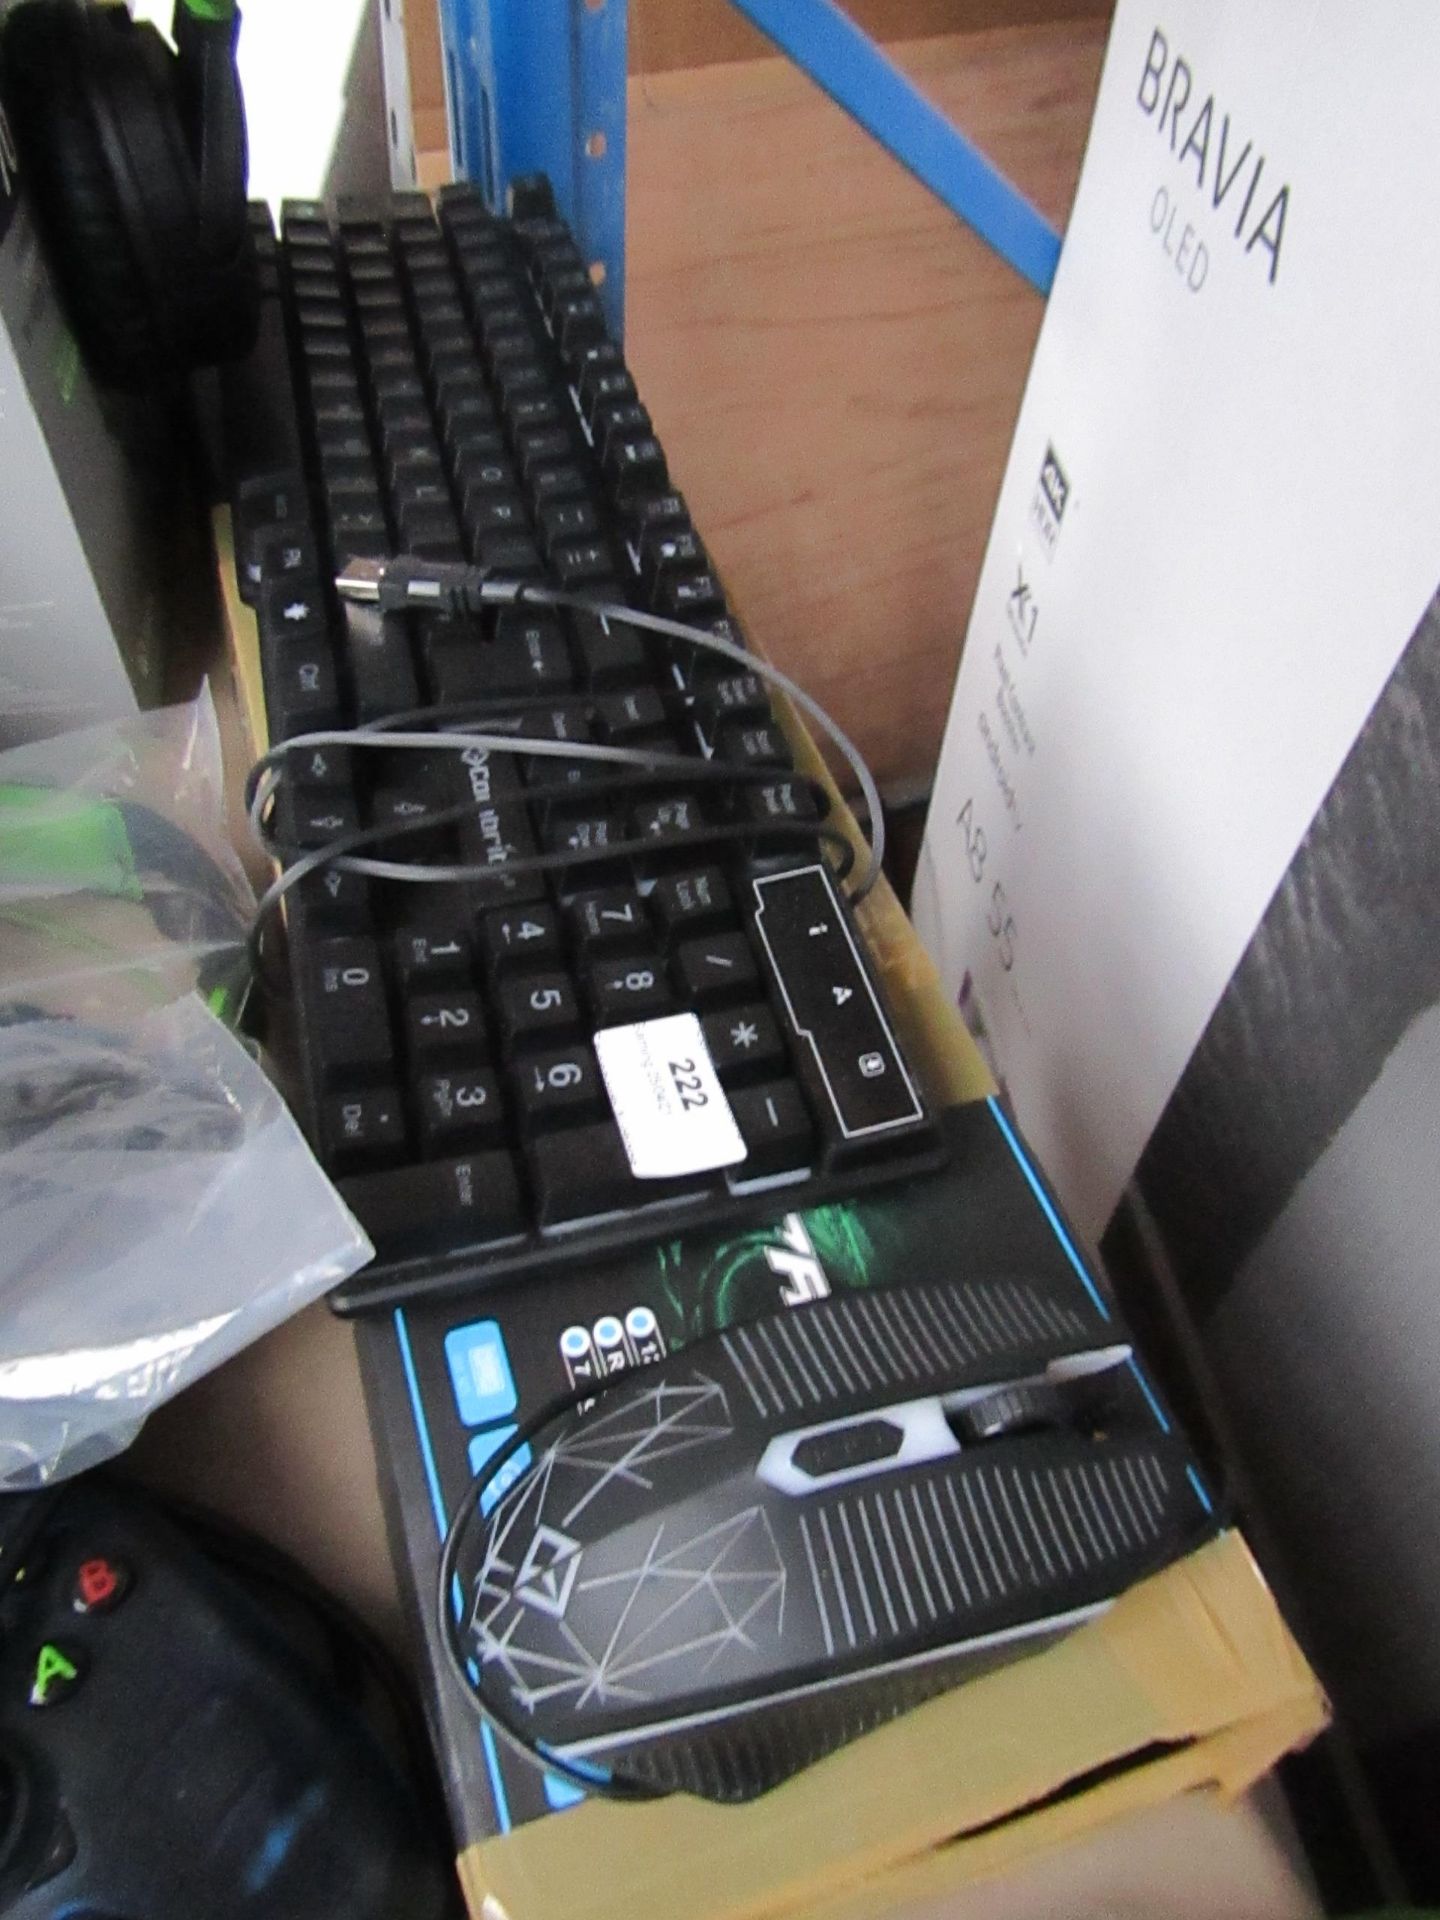 Combrite - Raptor Keyboard & Mouse - Rainbow Backlit - Looks in Decent Cndition But Unchecked &